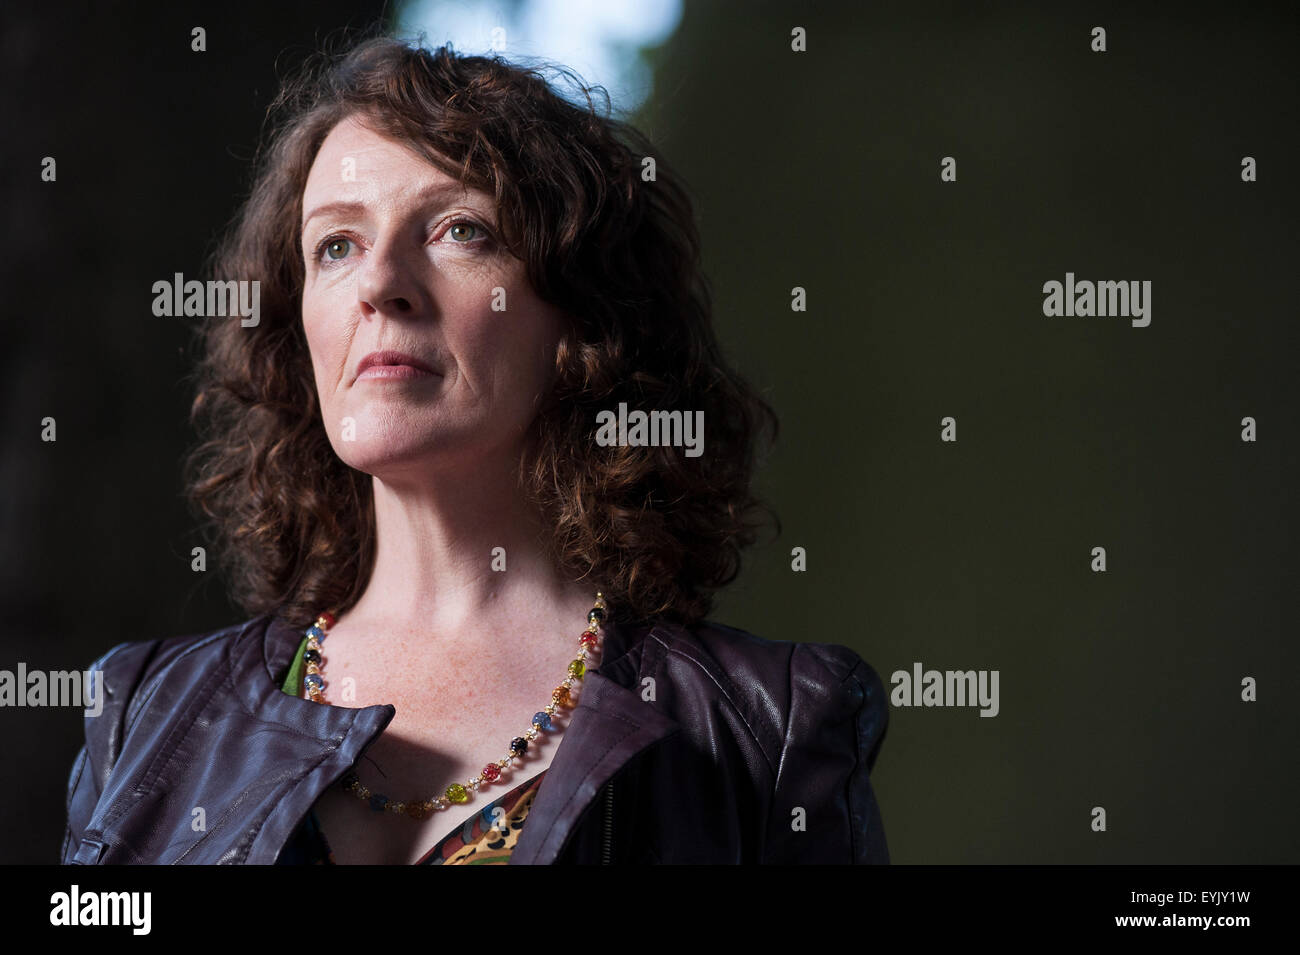 Award-winning actress, Michèle Forbes, appearing at the Edinburgh International Book Festival. Stock Photo